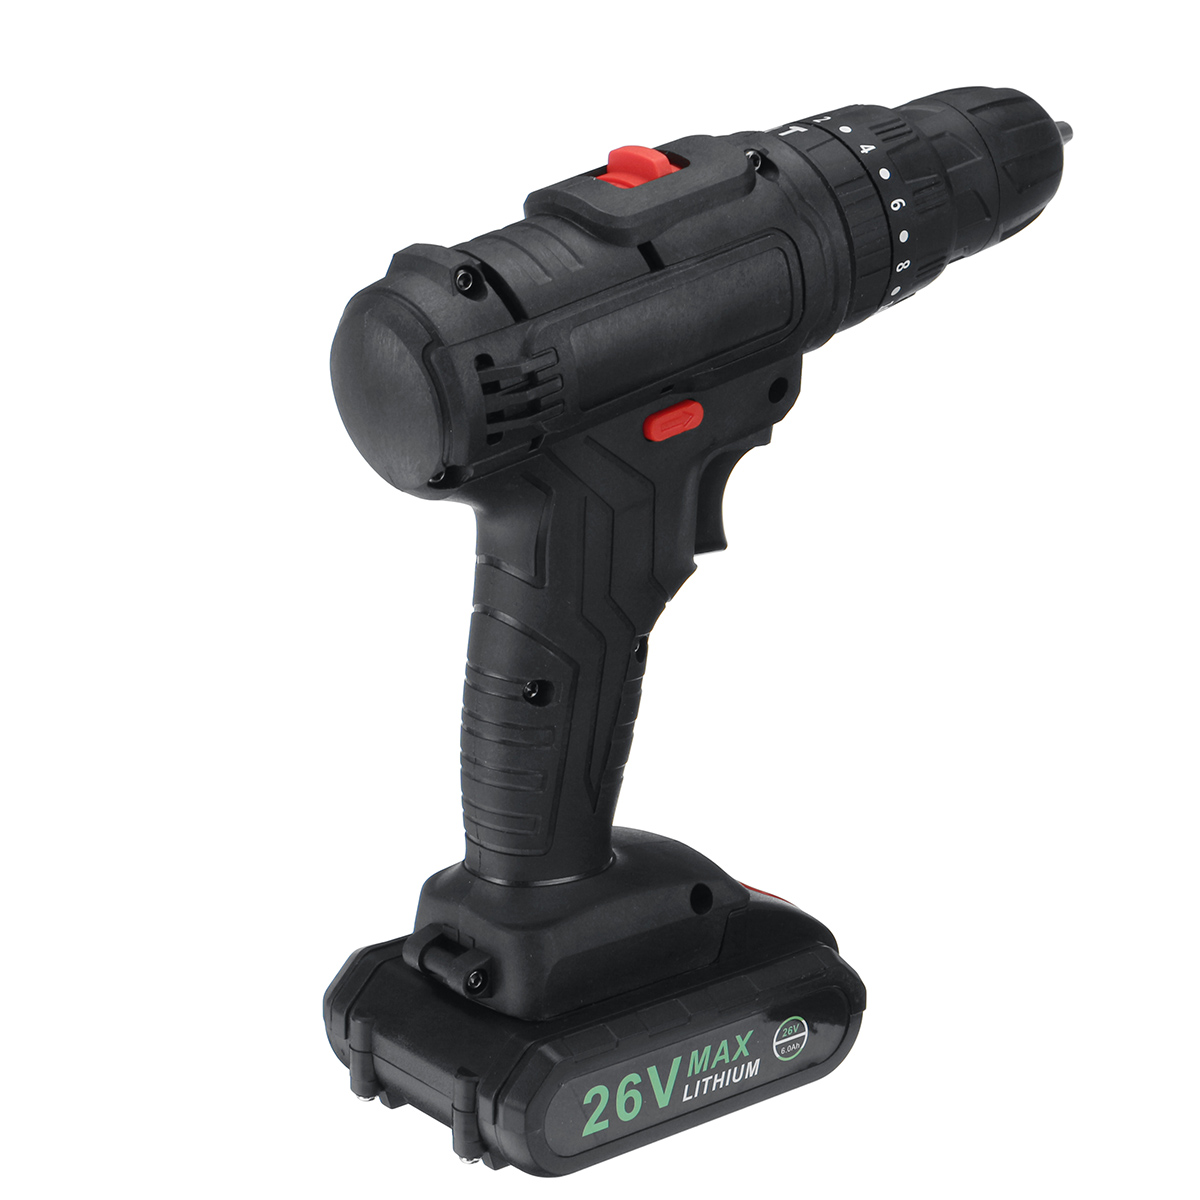 48V-1500W-Impact-Electric-Drill-28Nm-Max-Torque-LED-Light-Screwdriver-Power-W-12pc-Battery-1768847-4